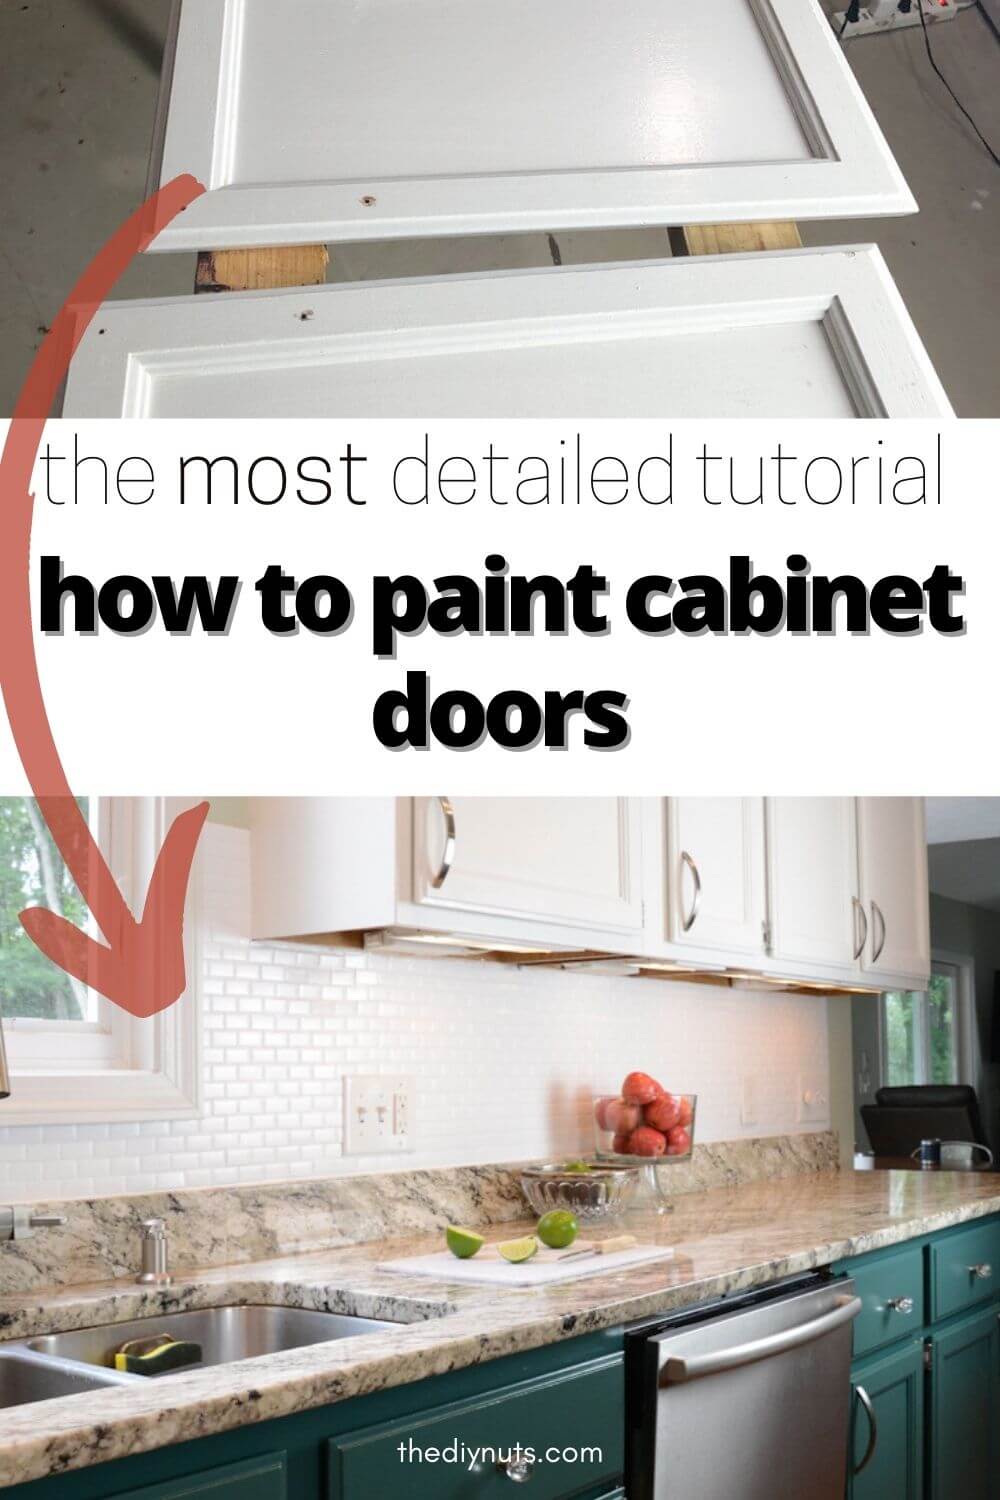 how to paint cabinet doors with white doors showing newly painted kitchen